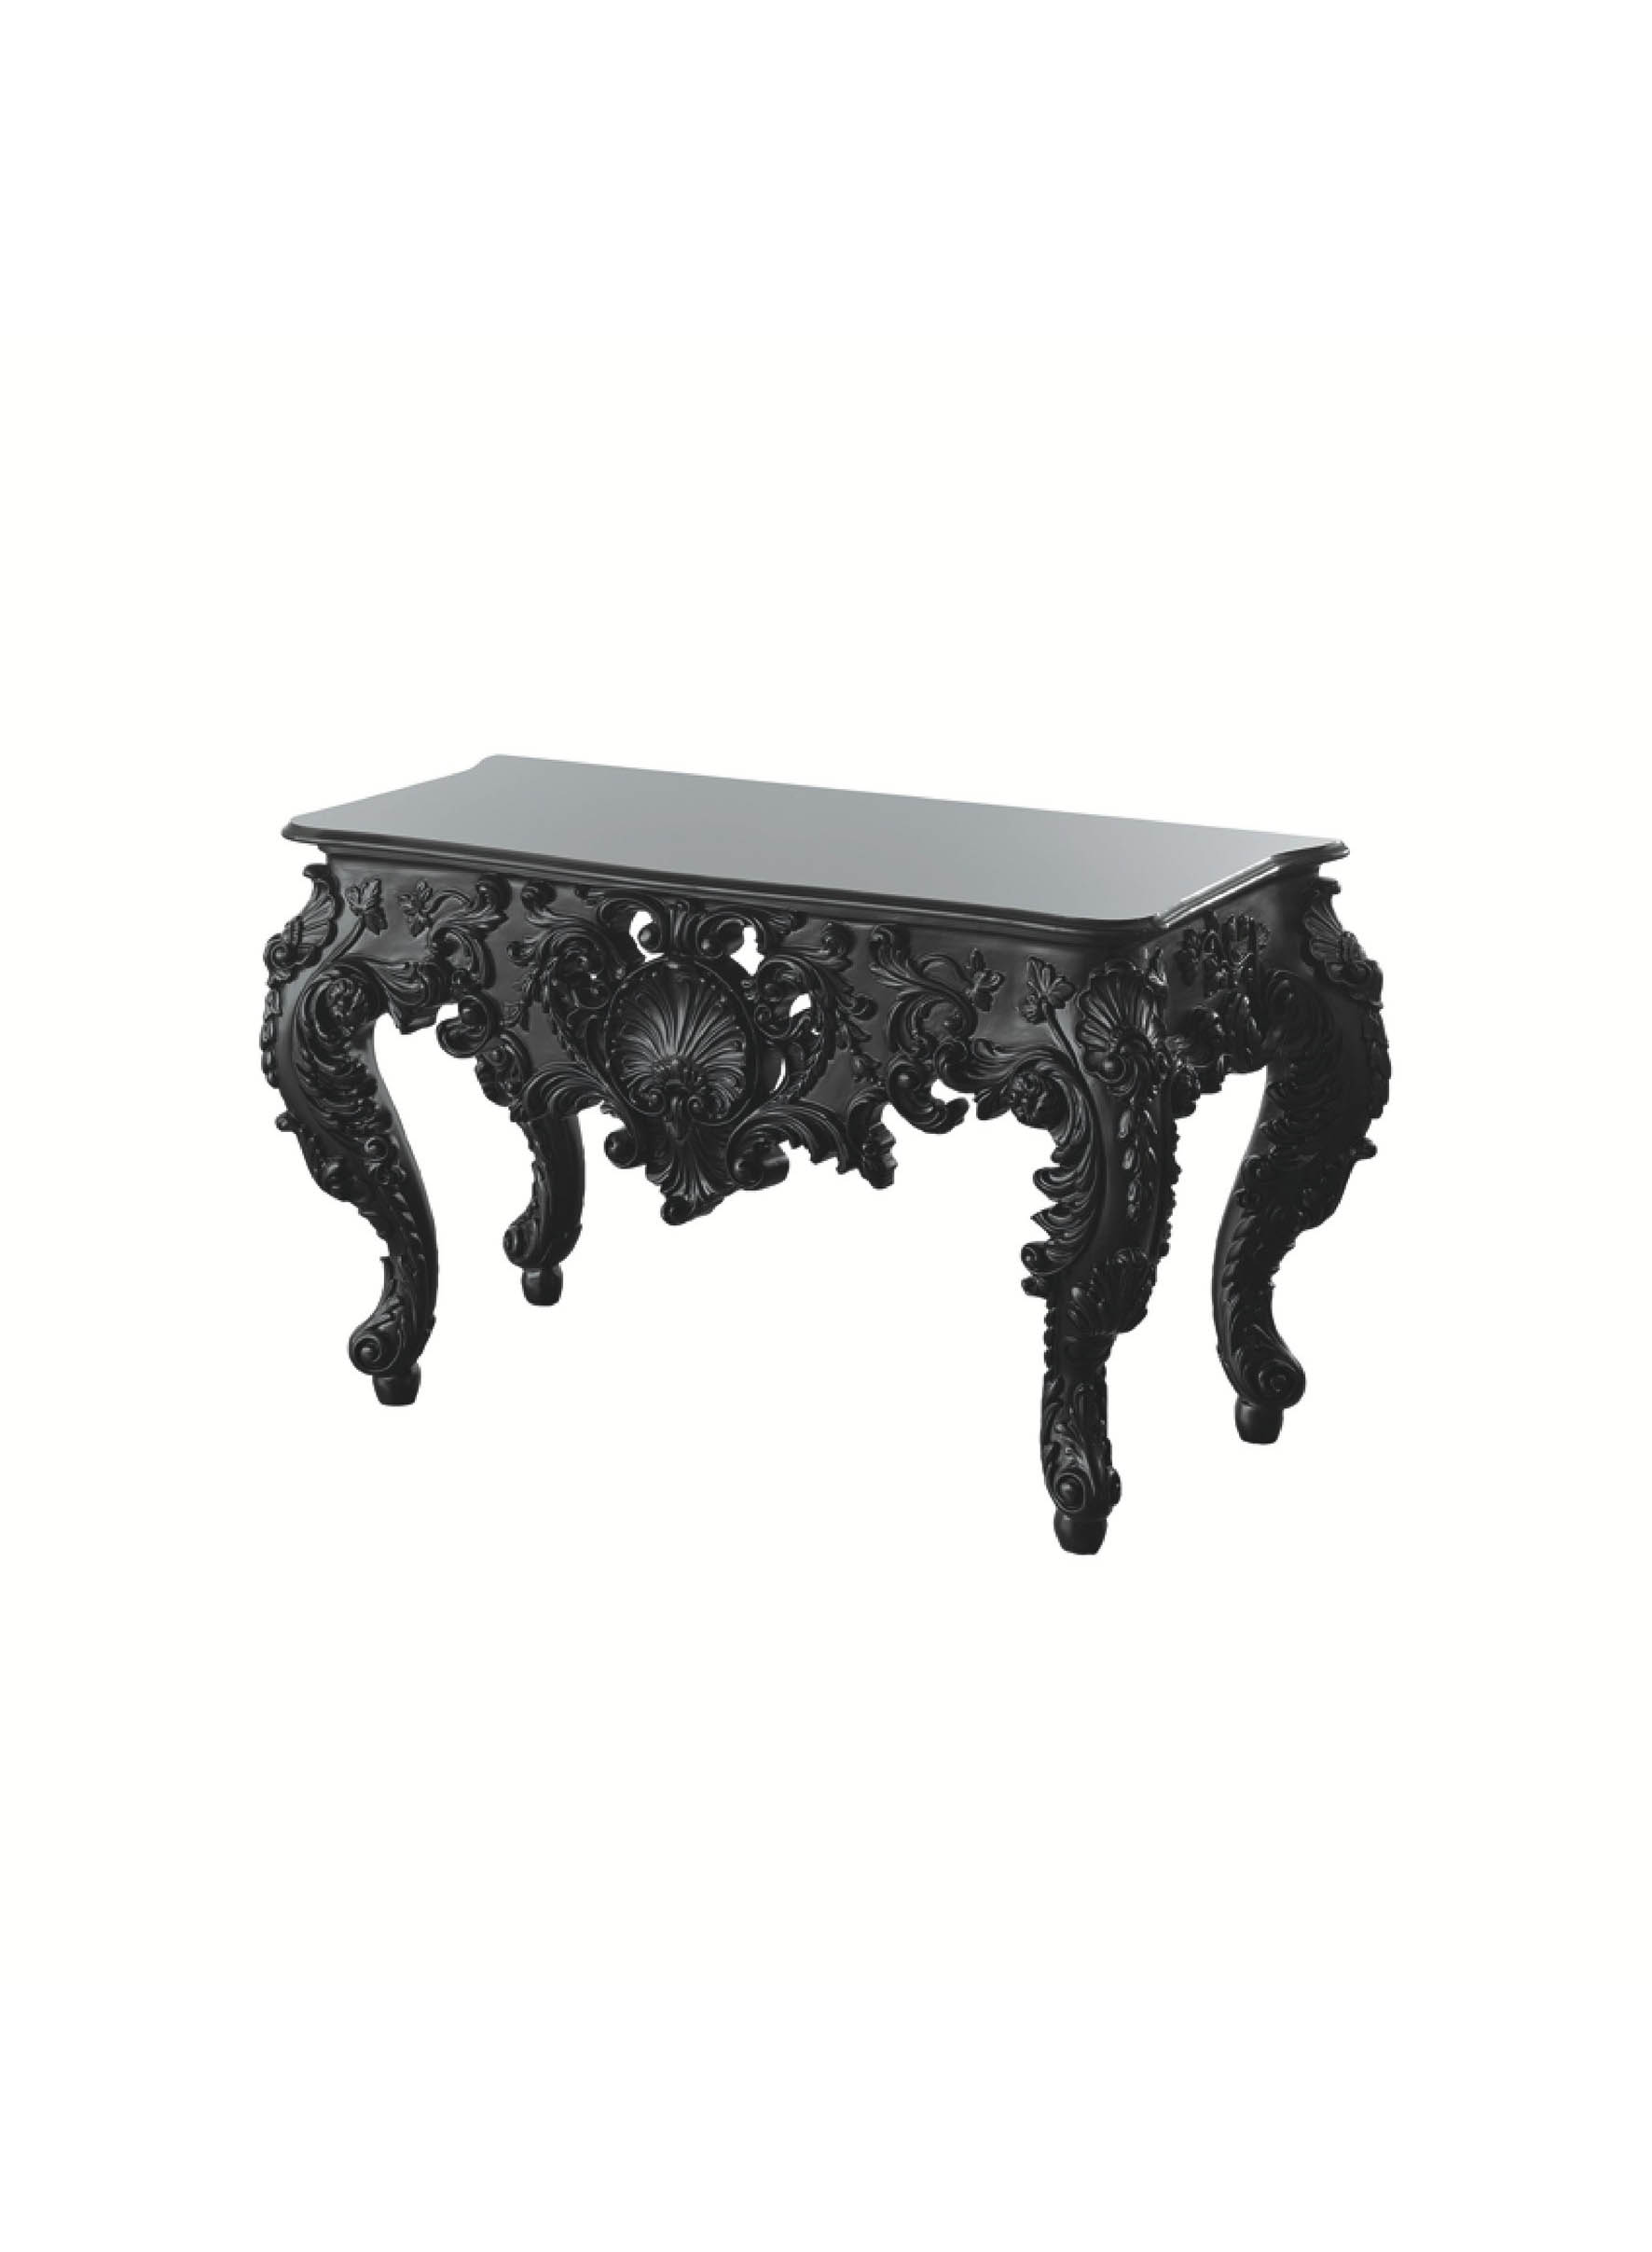 New Antiques Table 127 Black